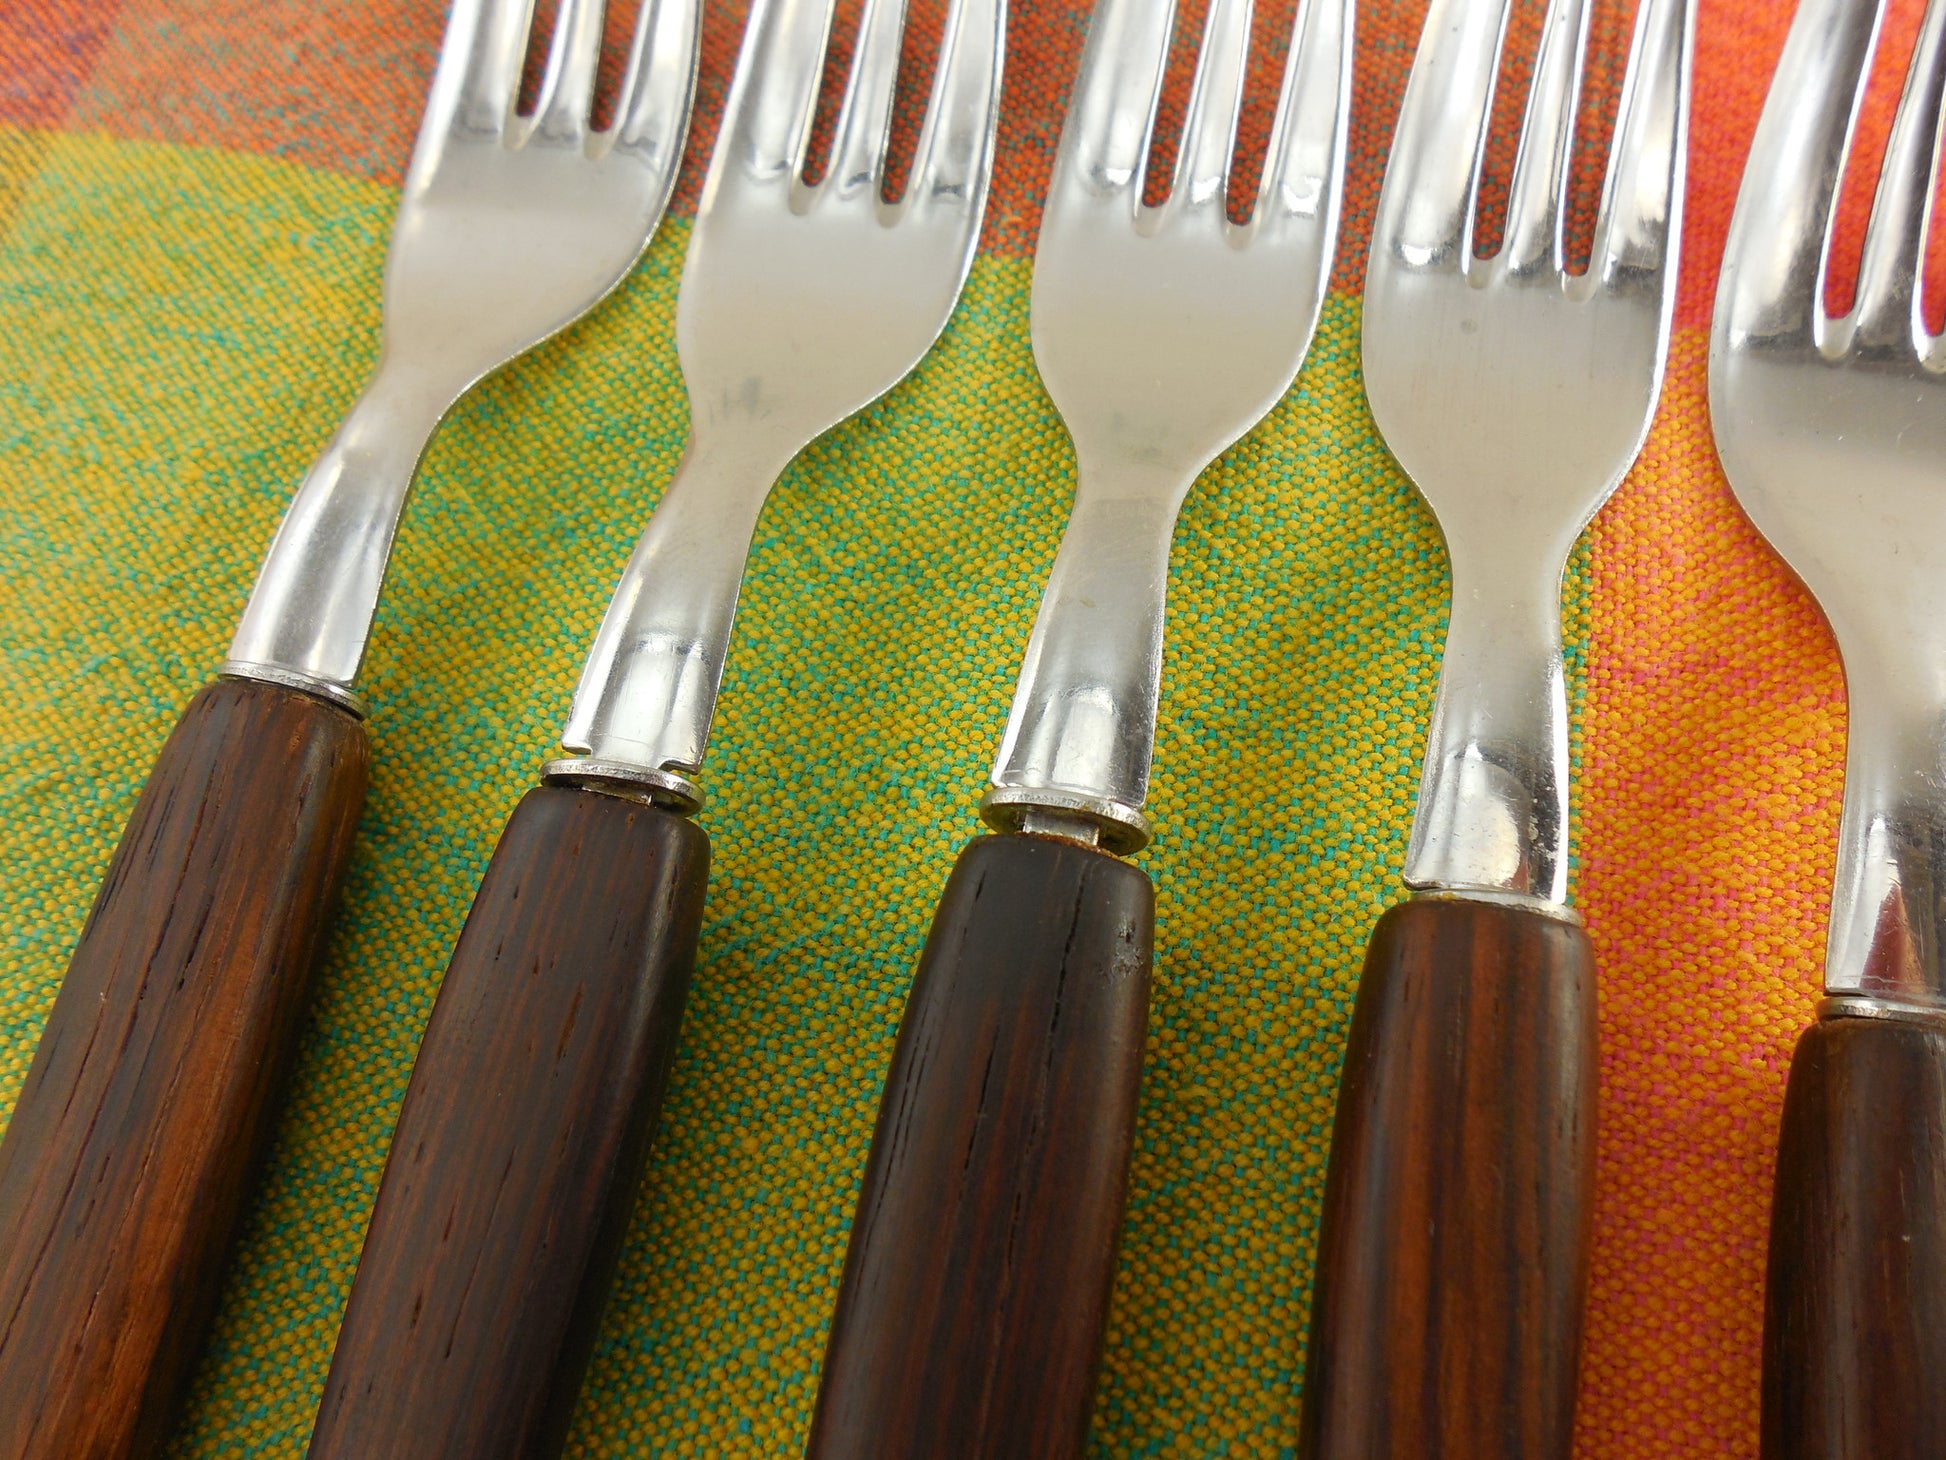 Danish Modern Salad Forks - ROSTFREI Stainless with Rosewood Handles View 2